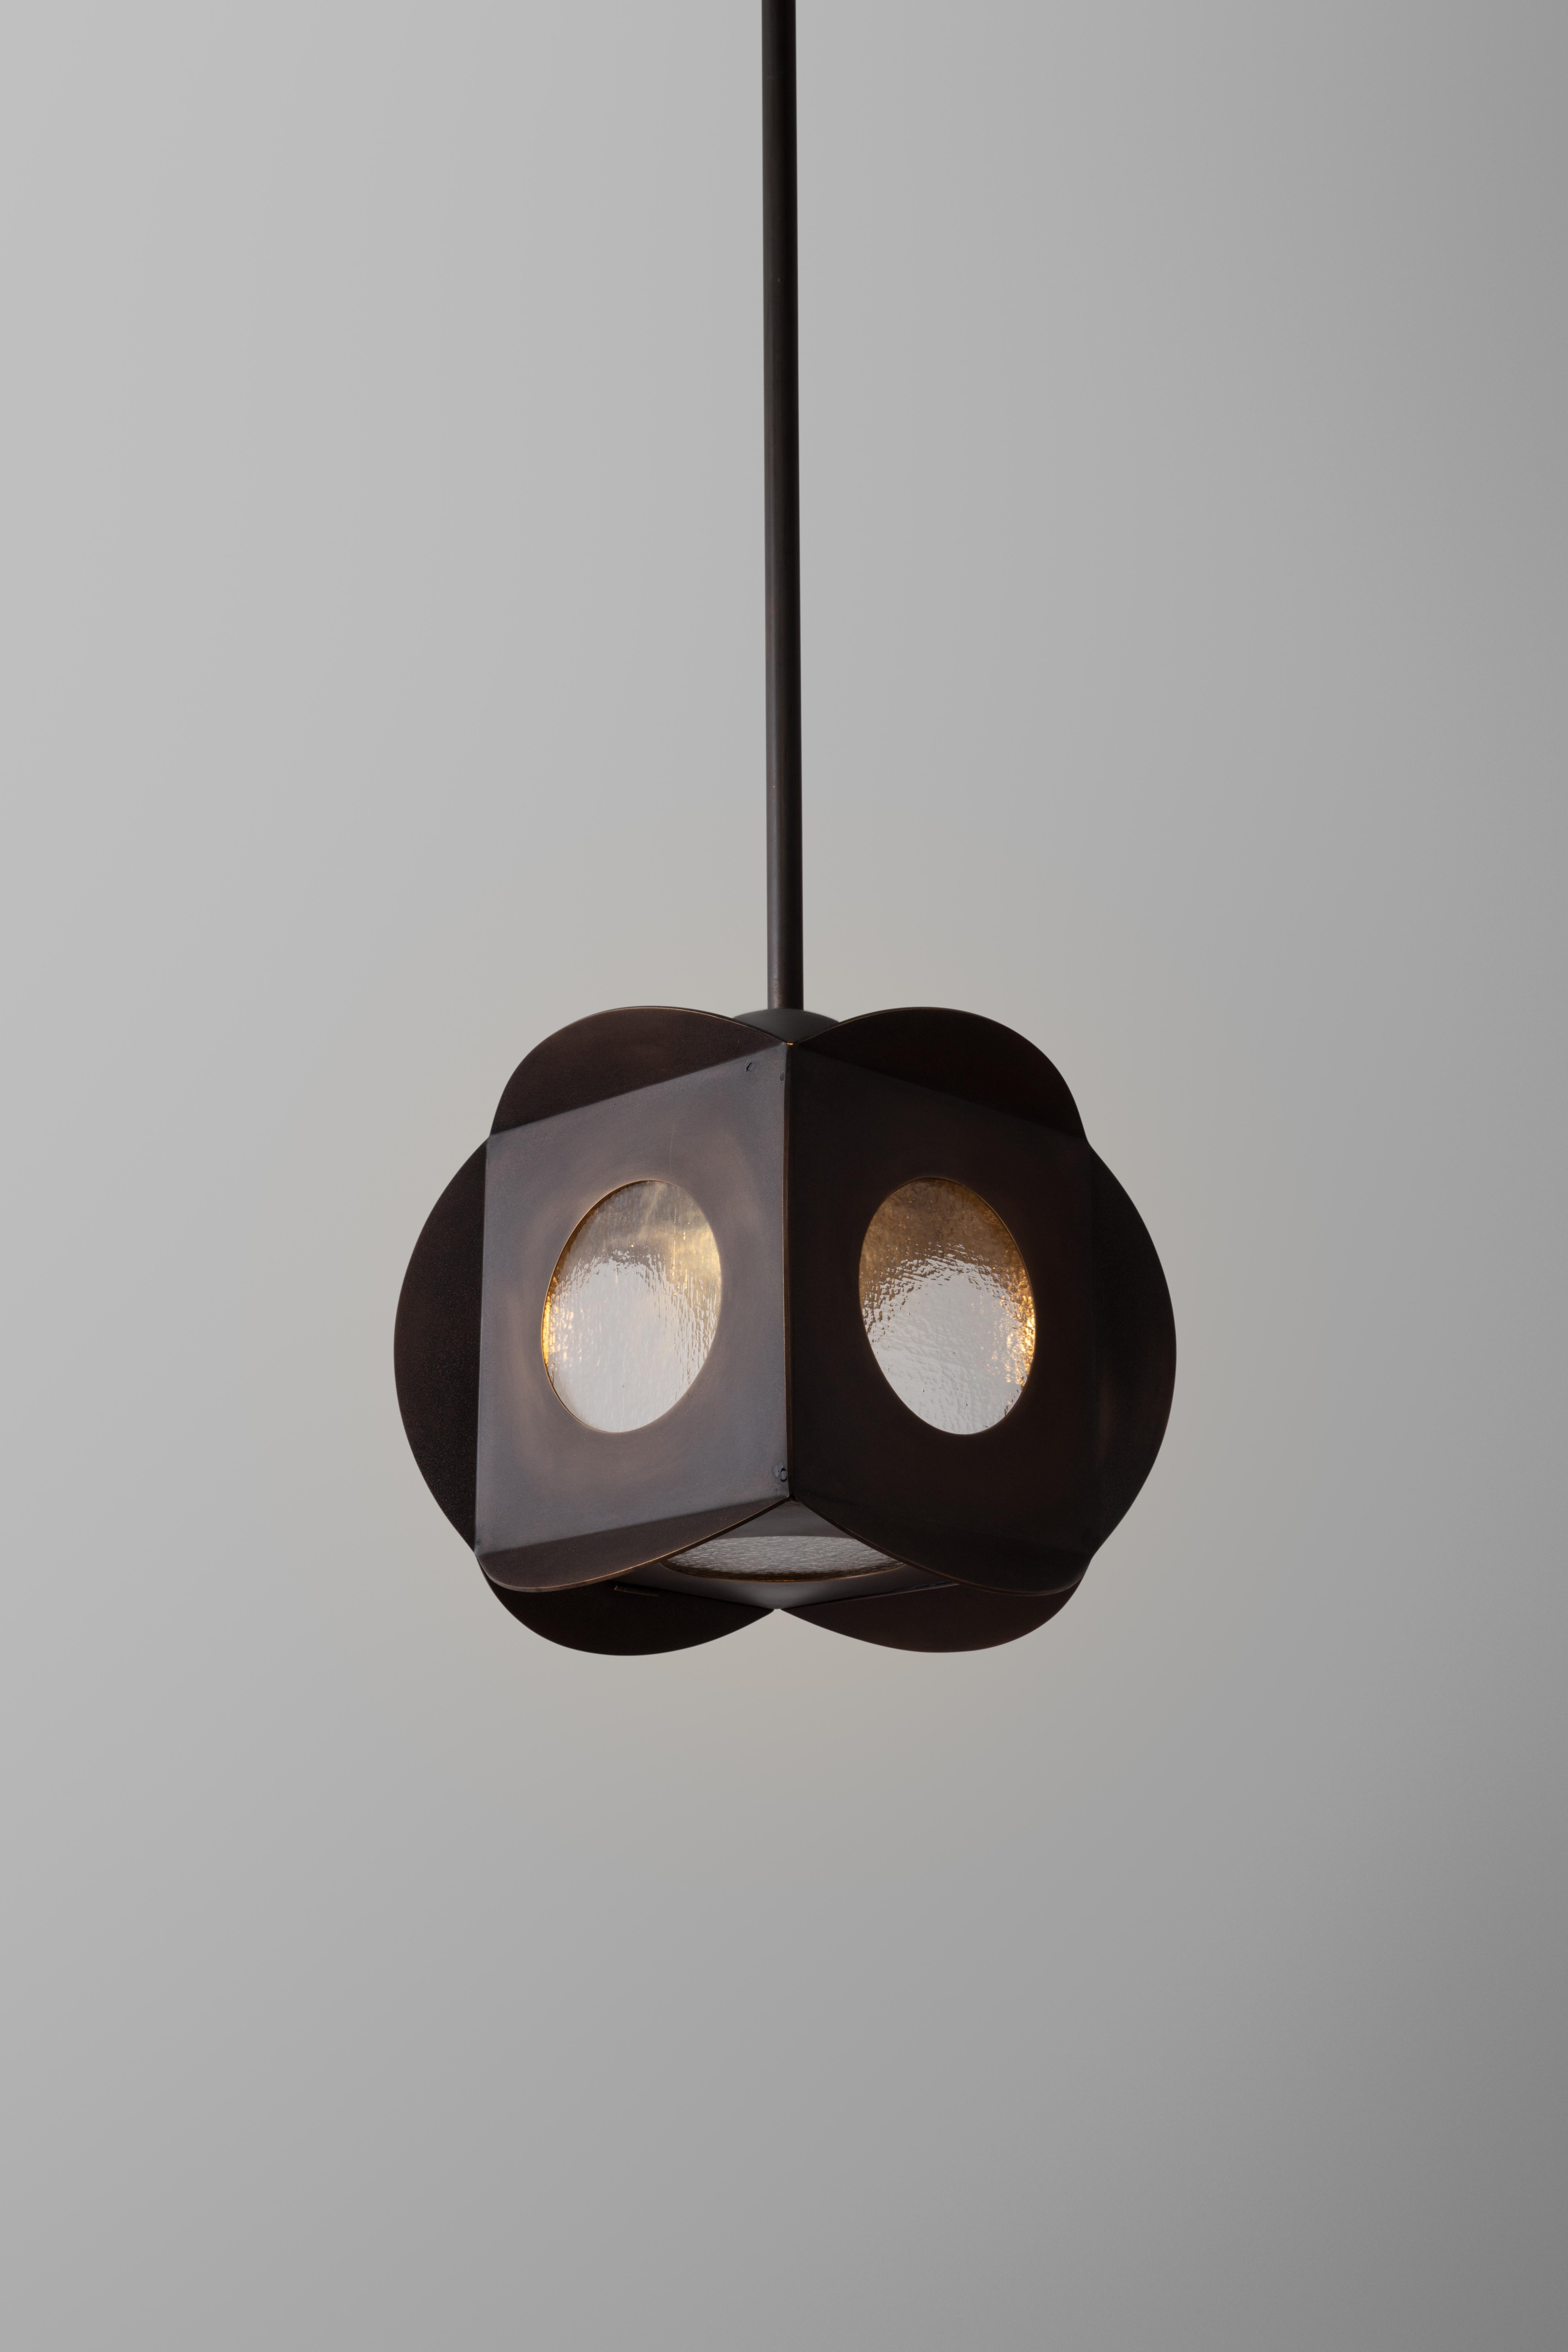 Cubic pendant made by intersecting brass circles. The bottom of the fixture is a latched door entry. 
Circular windows invite the viewer to peek into the fixture.

The fixture is sandblasted to give it a natural aged beach-worn appearance, and